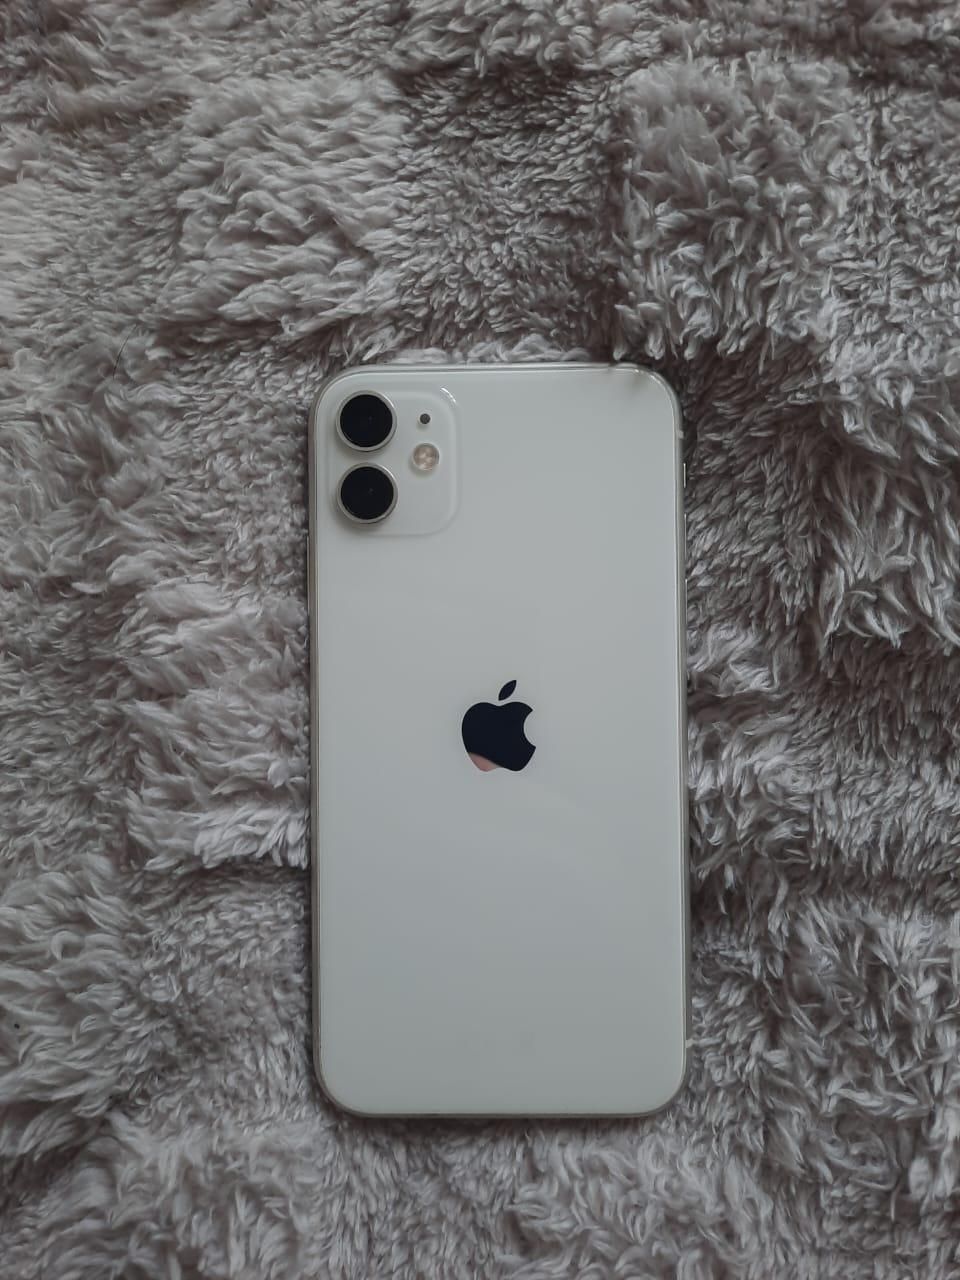 iPhone 11 128gn white